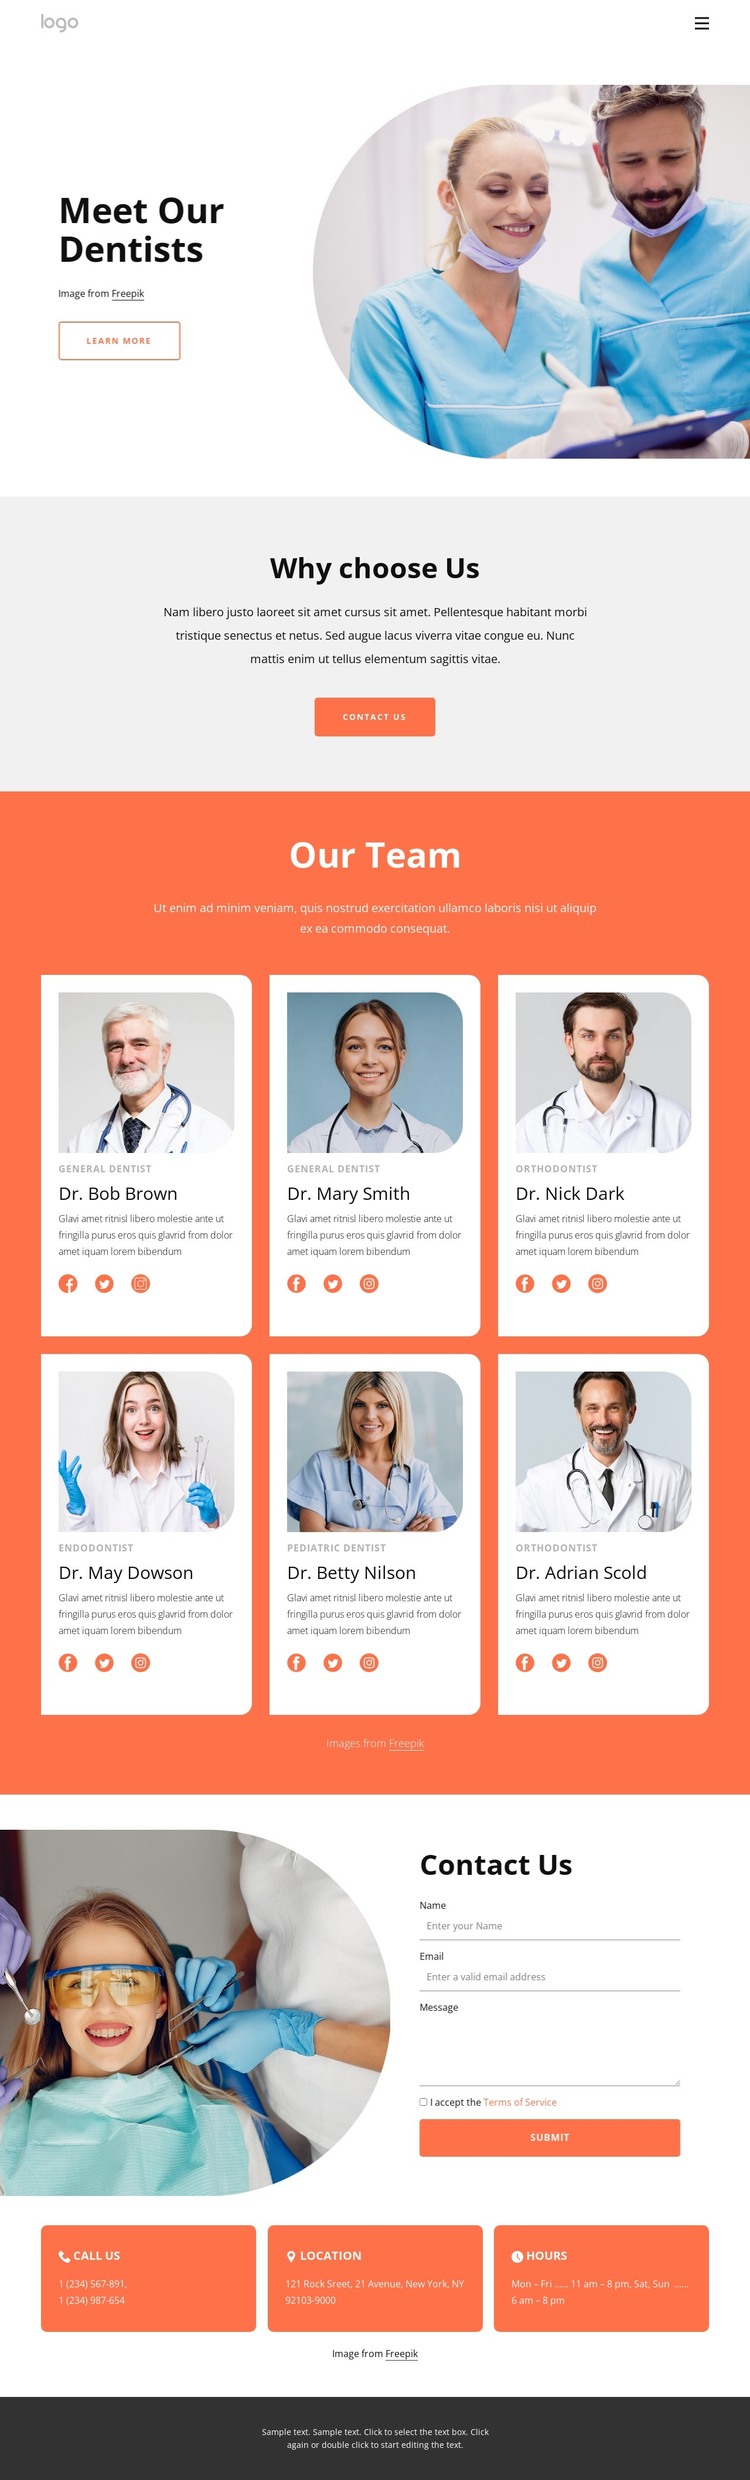 Highly-qualified dentists Web Design